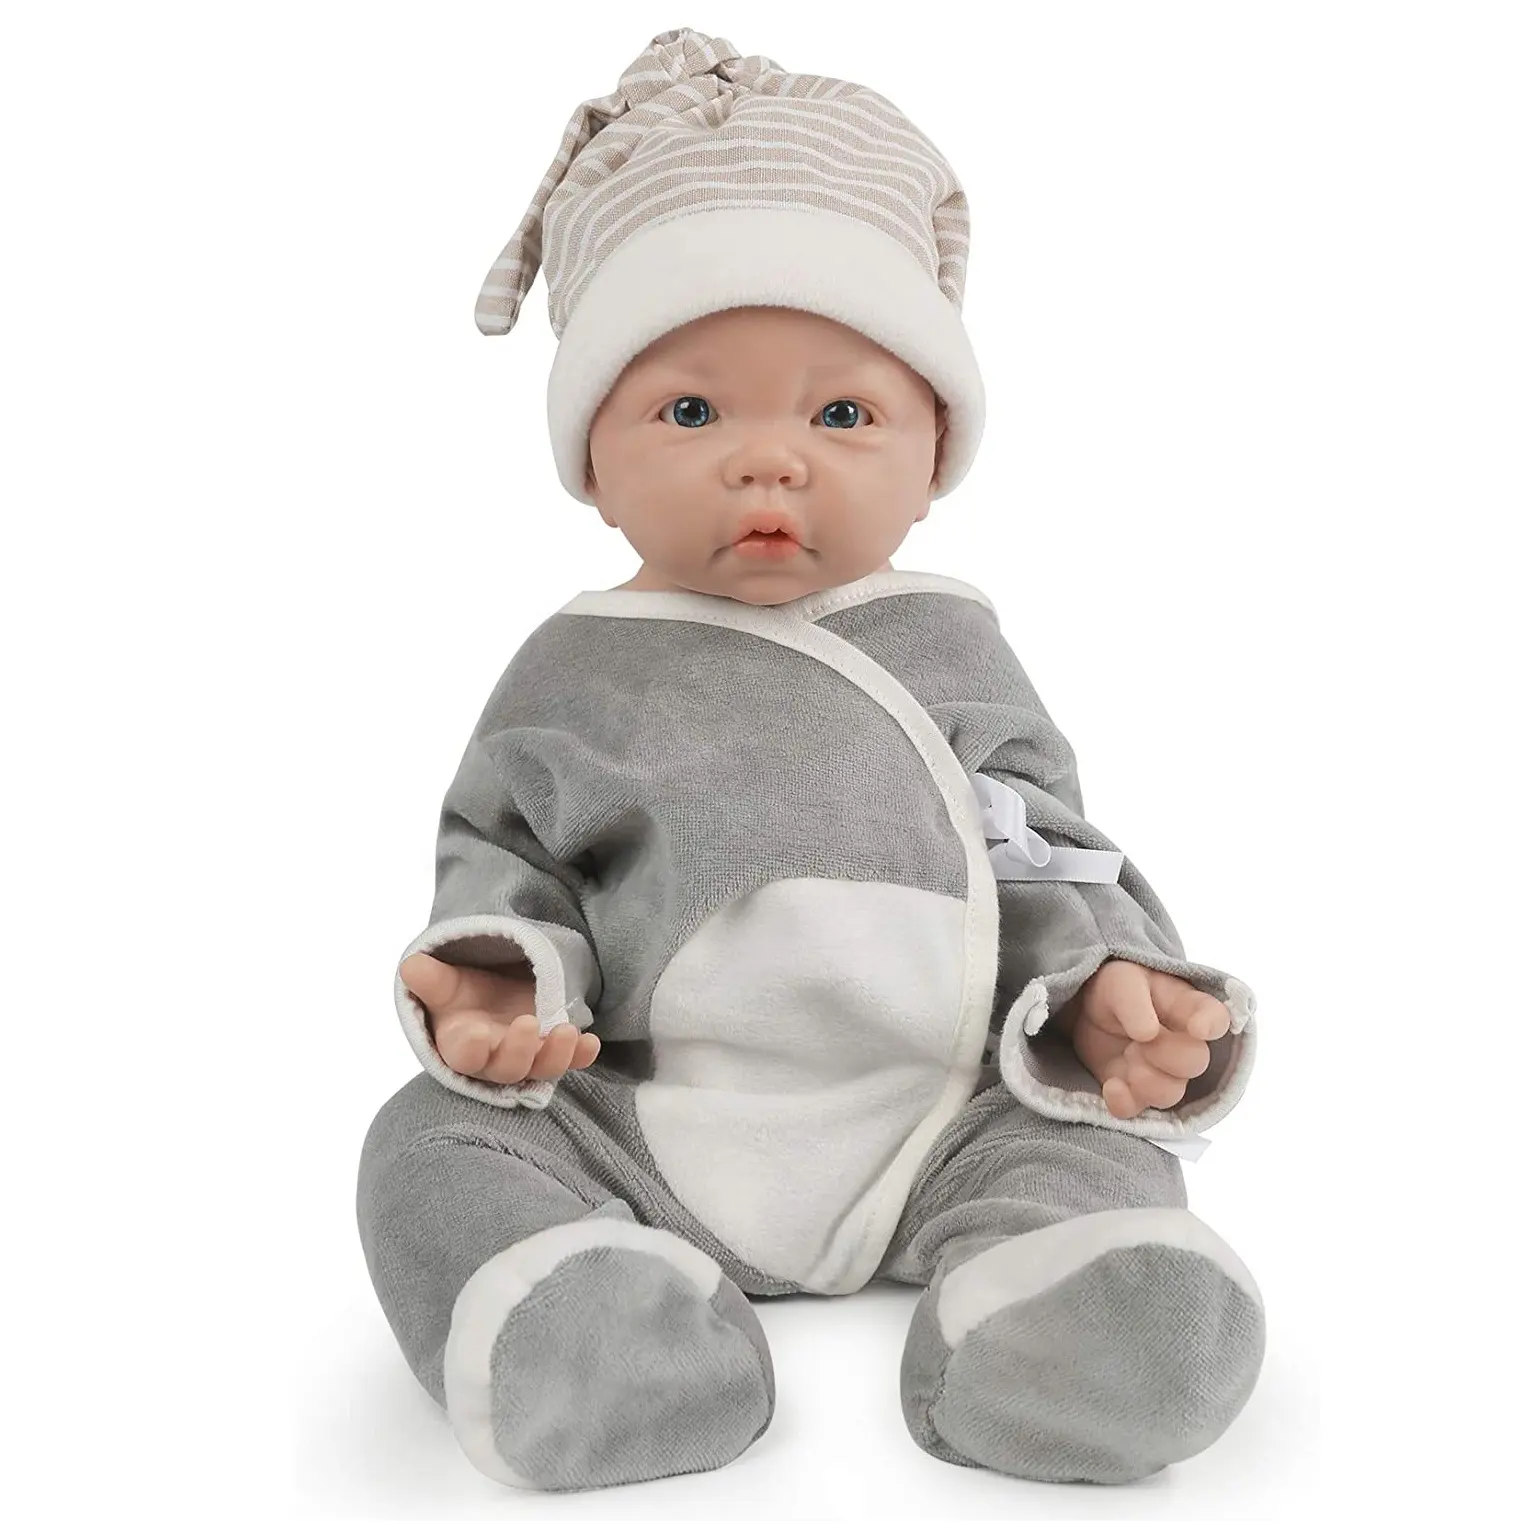 17 inch Realistic Full Silicon Reborn Baby Doll Look Real Not Vinyl Dolls